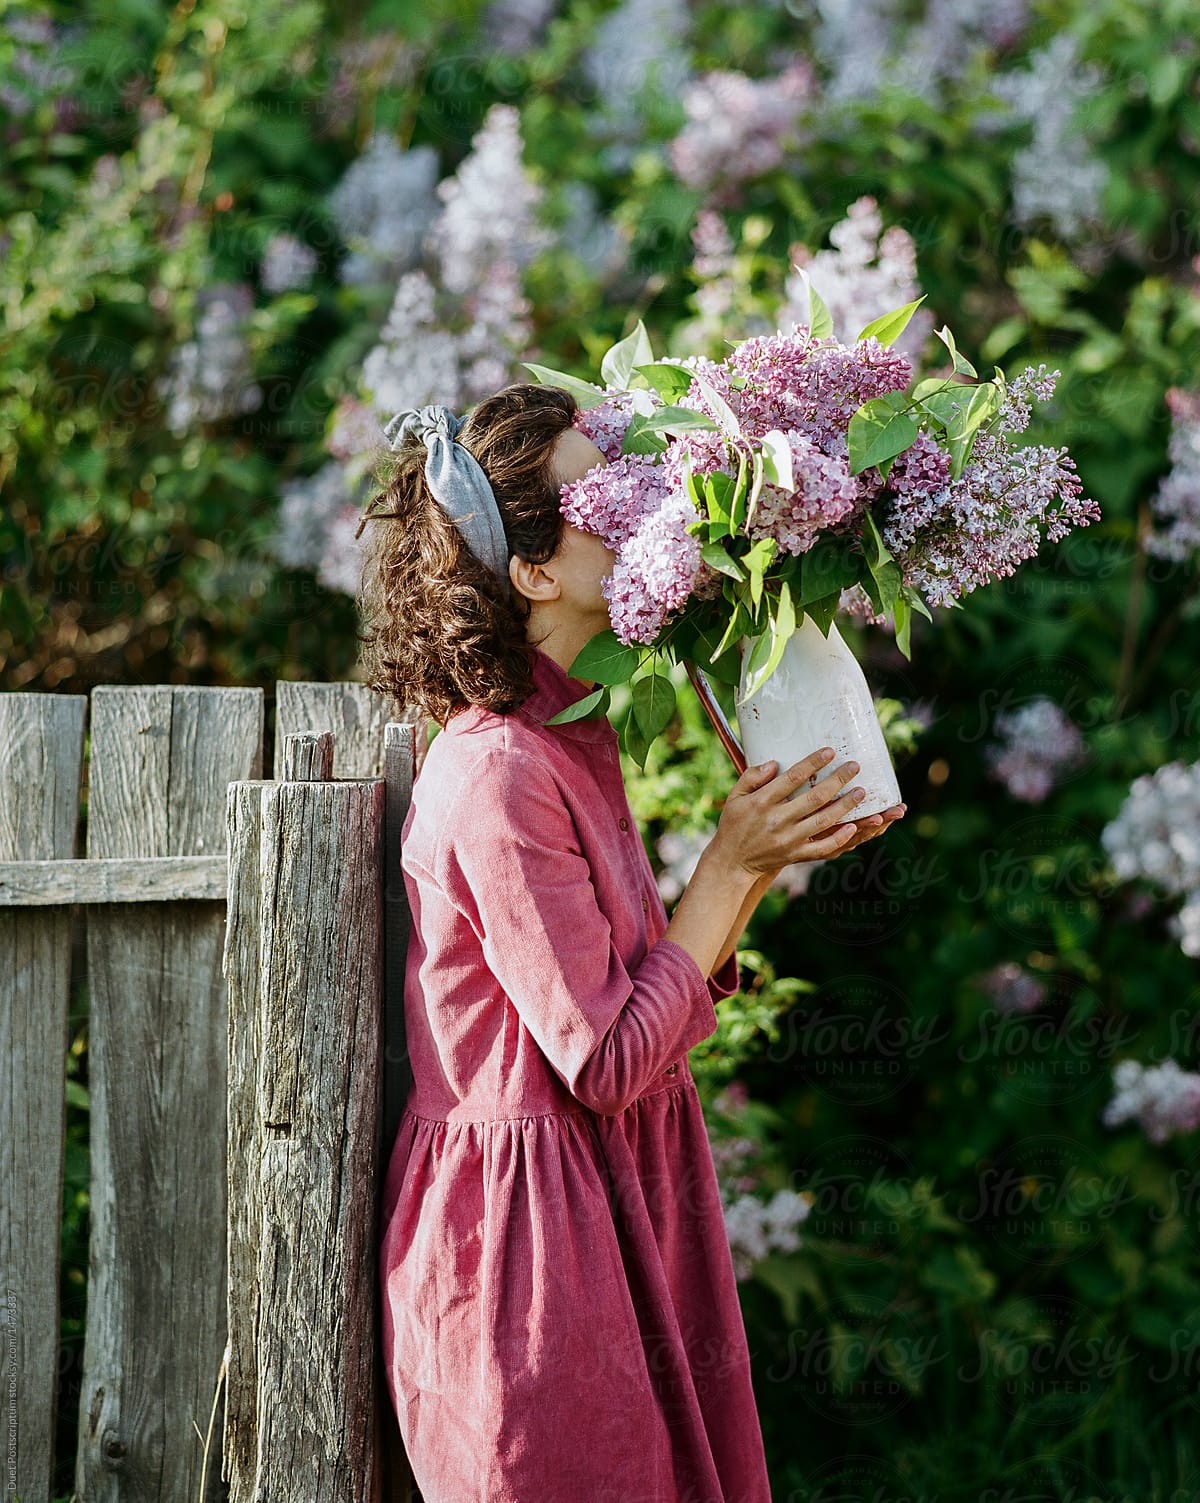 Woman sniffing flowers at fence